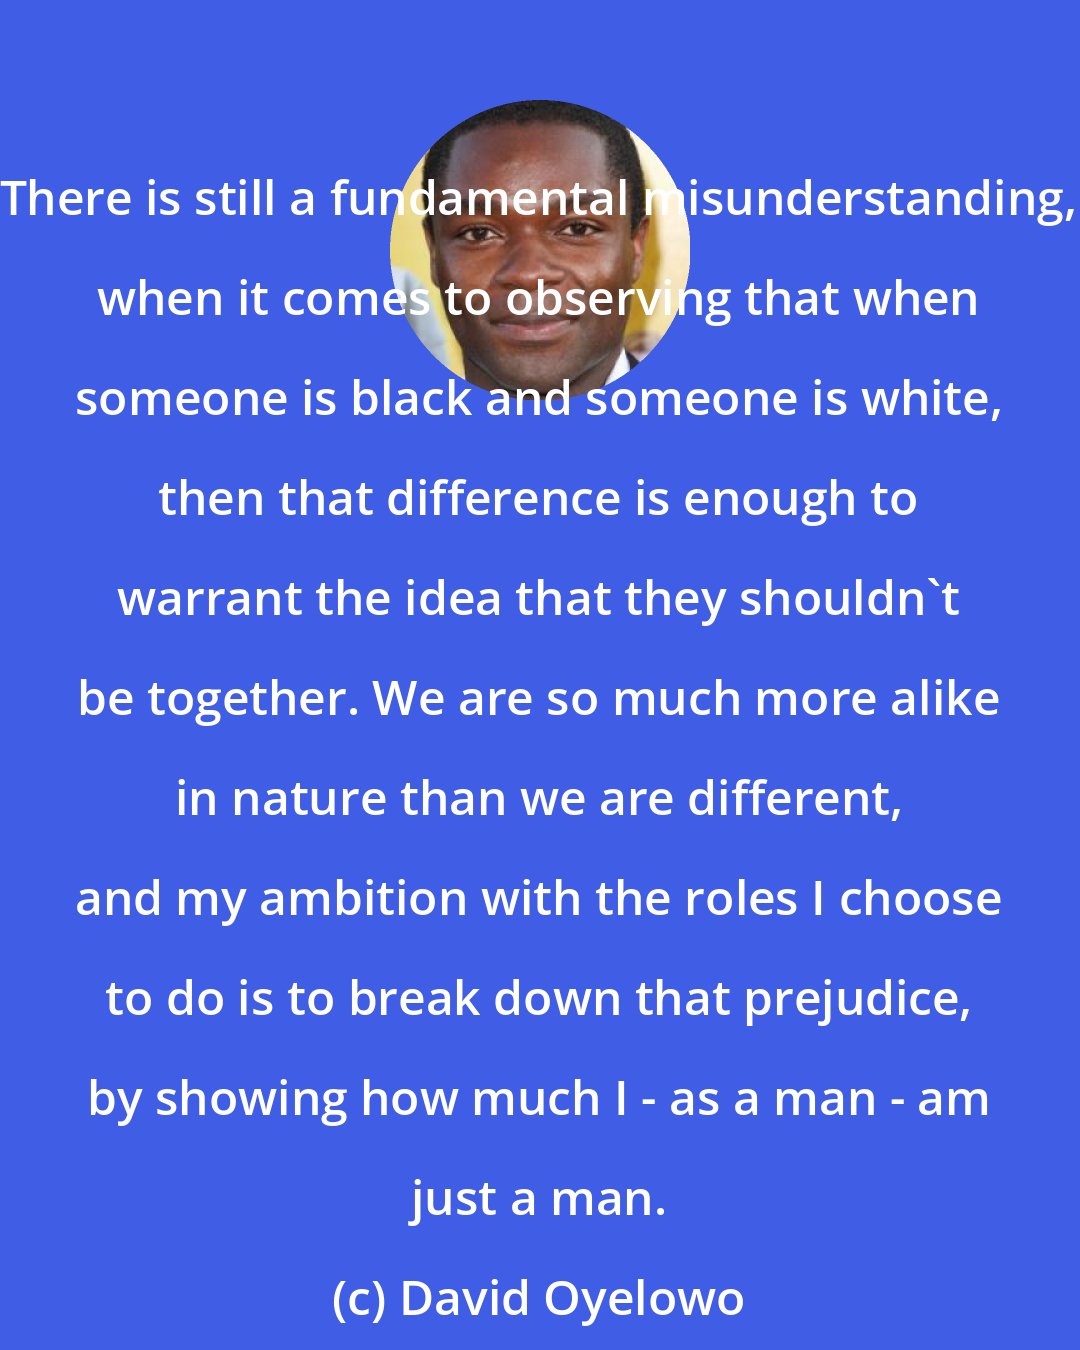 David Oyelowo: There is still a fundamental misunderstanding, when it comes to observing that when someone is black and someone is white, then that difference is enough to warrant the idea that they shouldn't be together. We are so much more alike in nature than we are different, and my ambition with the roles I choose to do is to break down that prejudice, by showing how much I - as a man - am just a man.